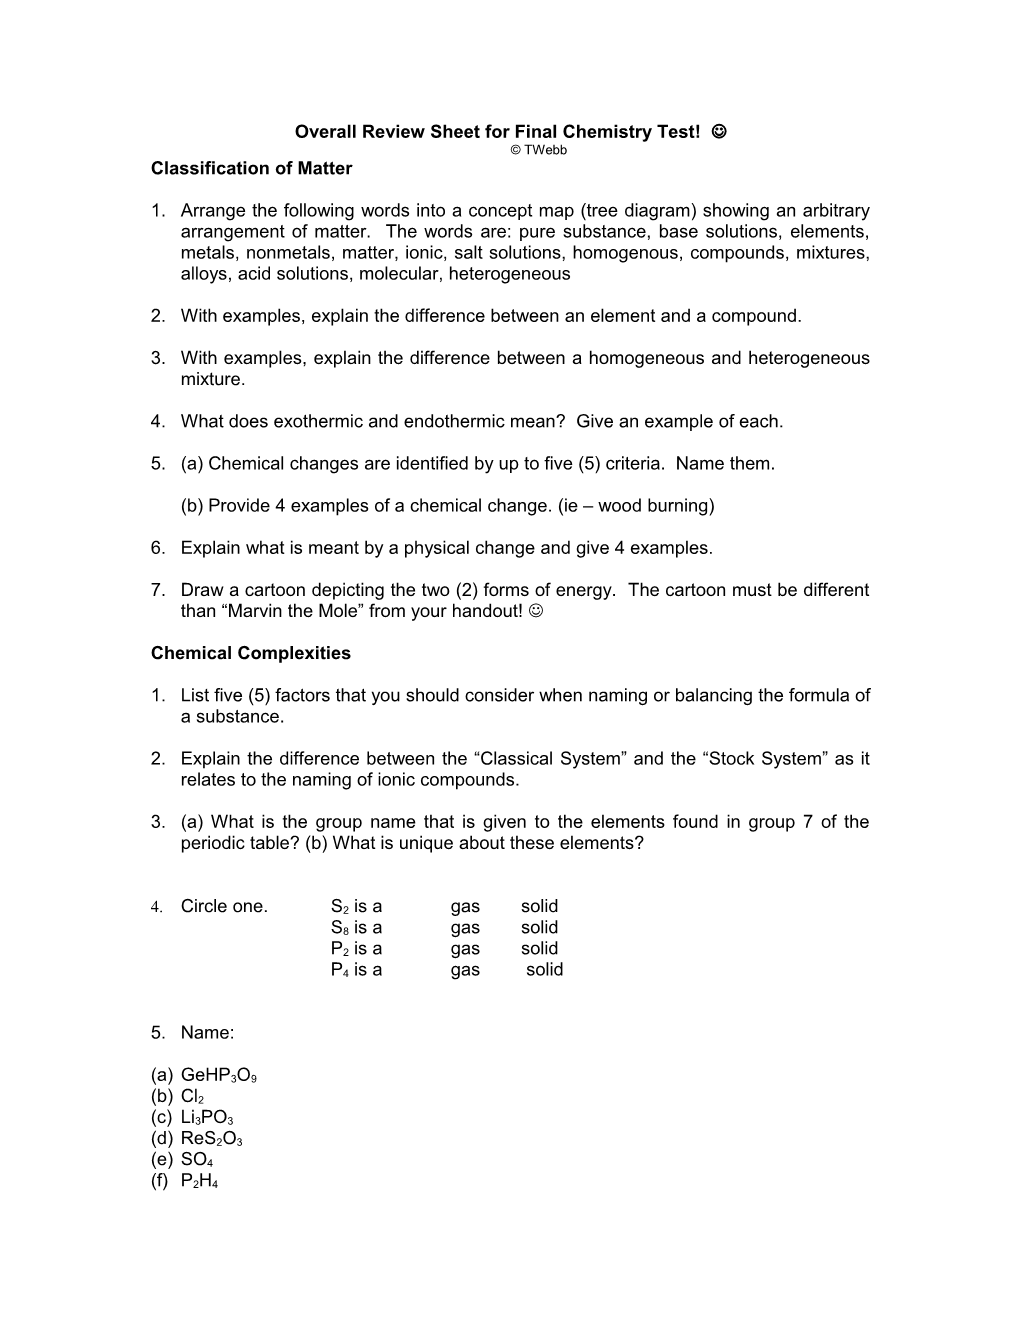 Overall Review Sheet for Final Chemistry Test